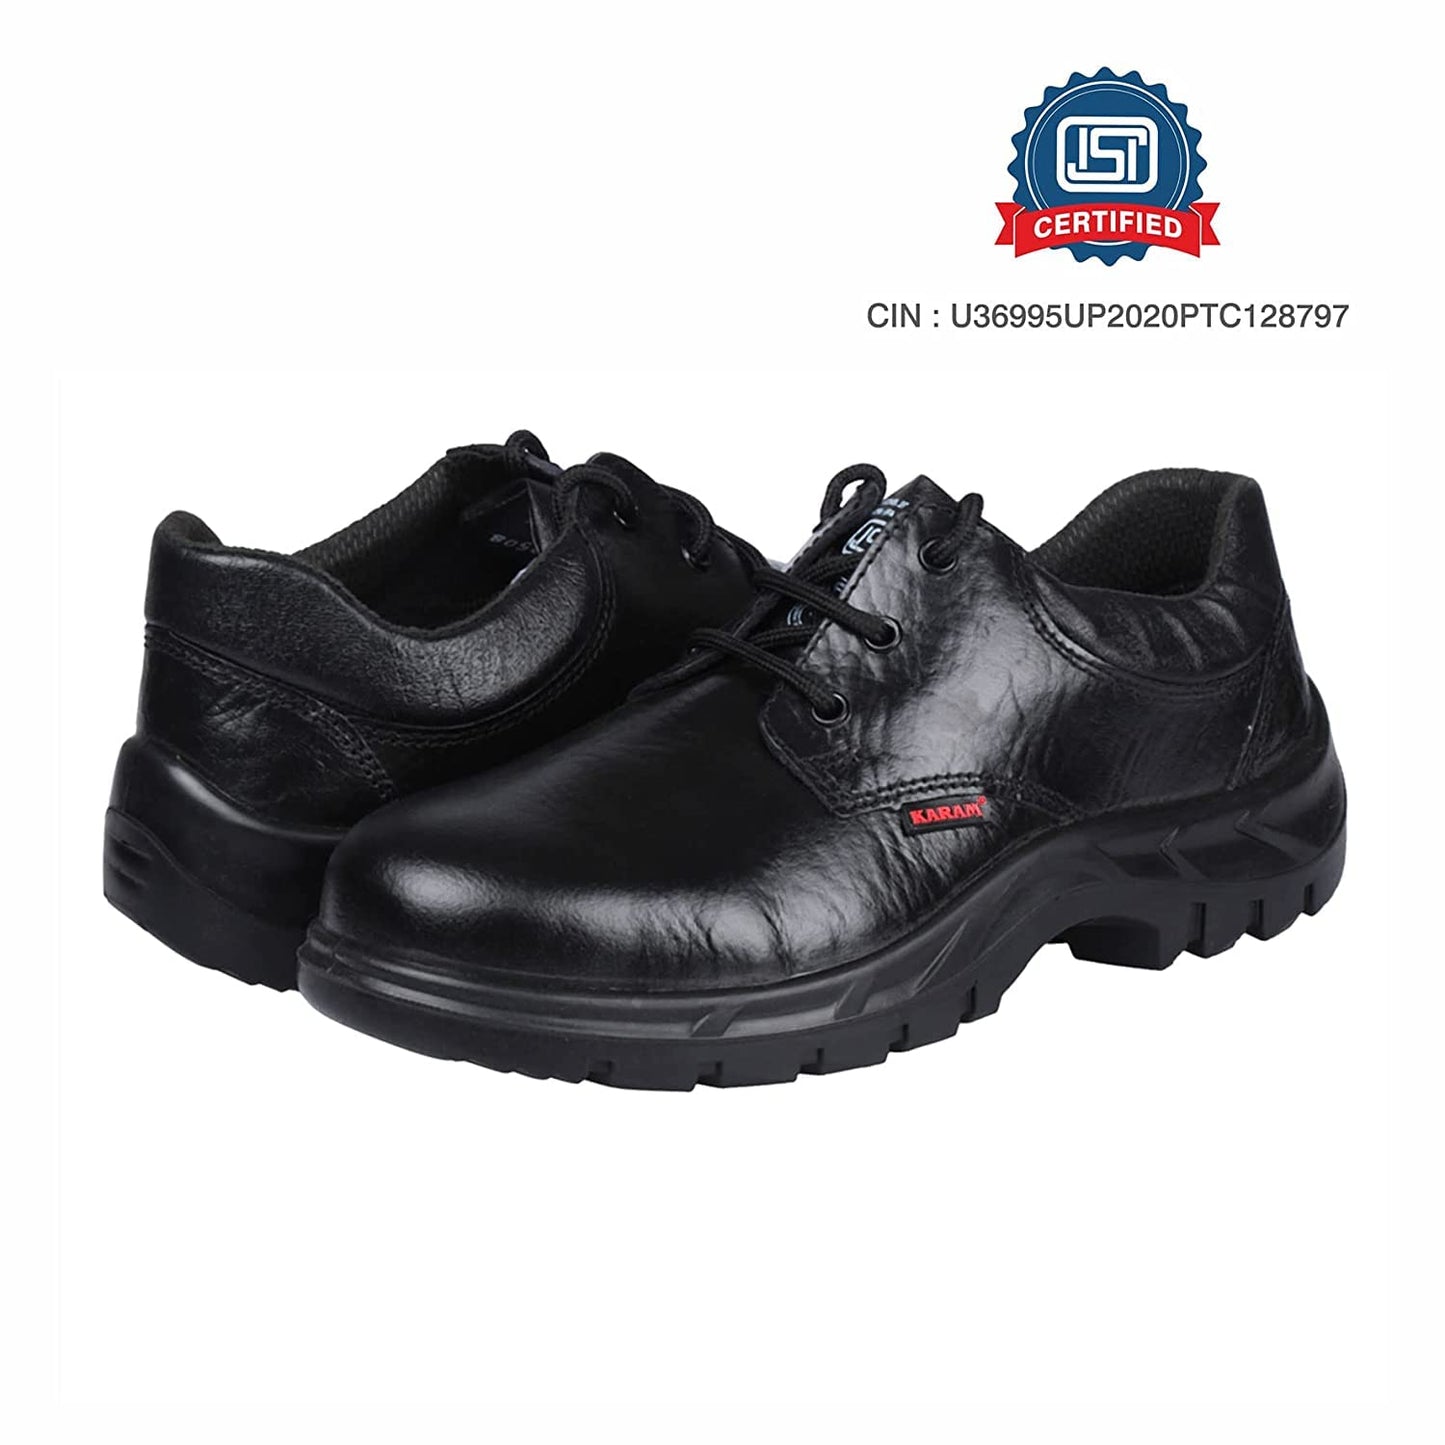 KARAM ISI Marked Leather Safety Shoe | Excellent Grip, Comfort and Slip Resistance | Safety Shoes with Steel Toe | Black | FS05BL